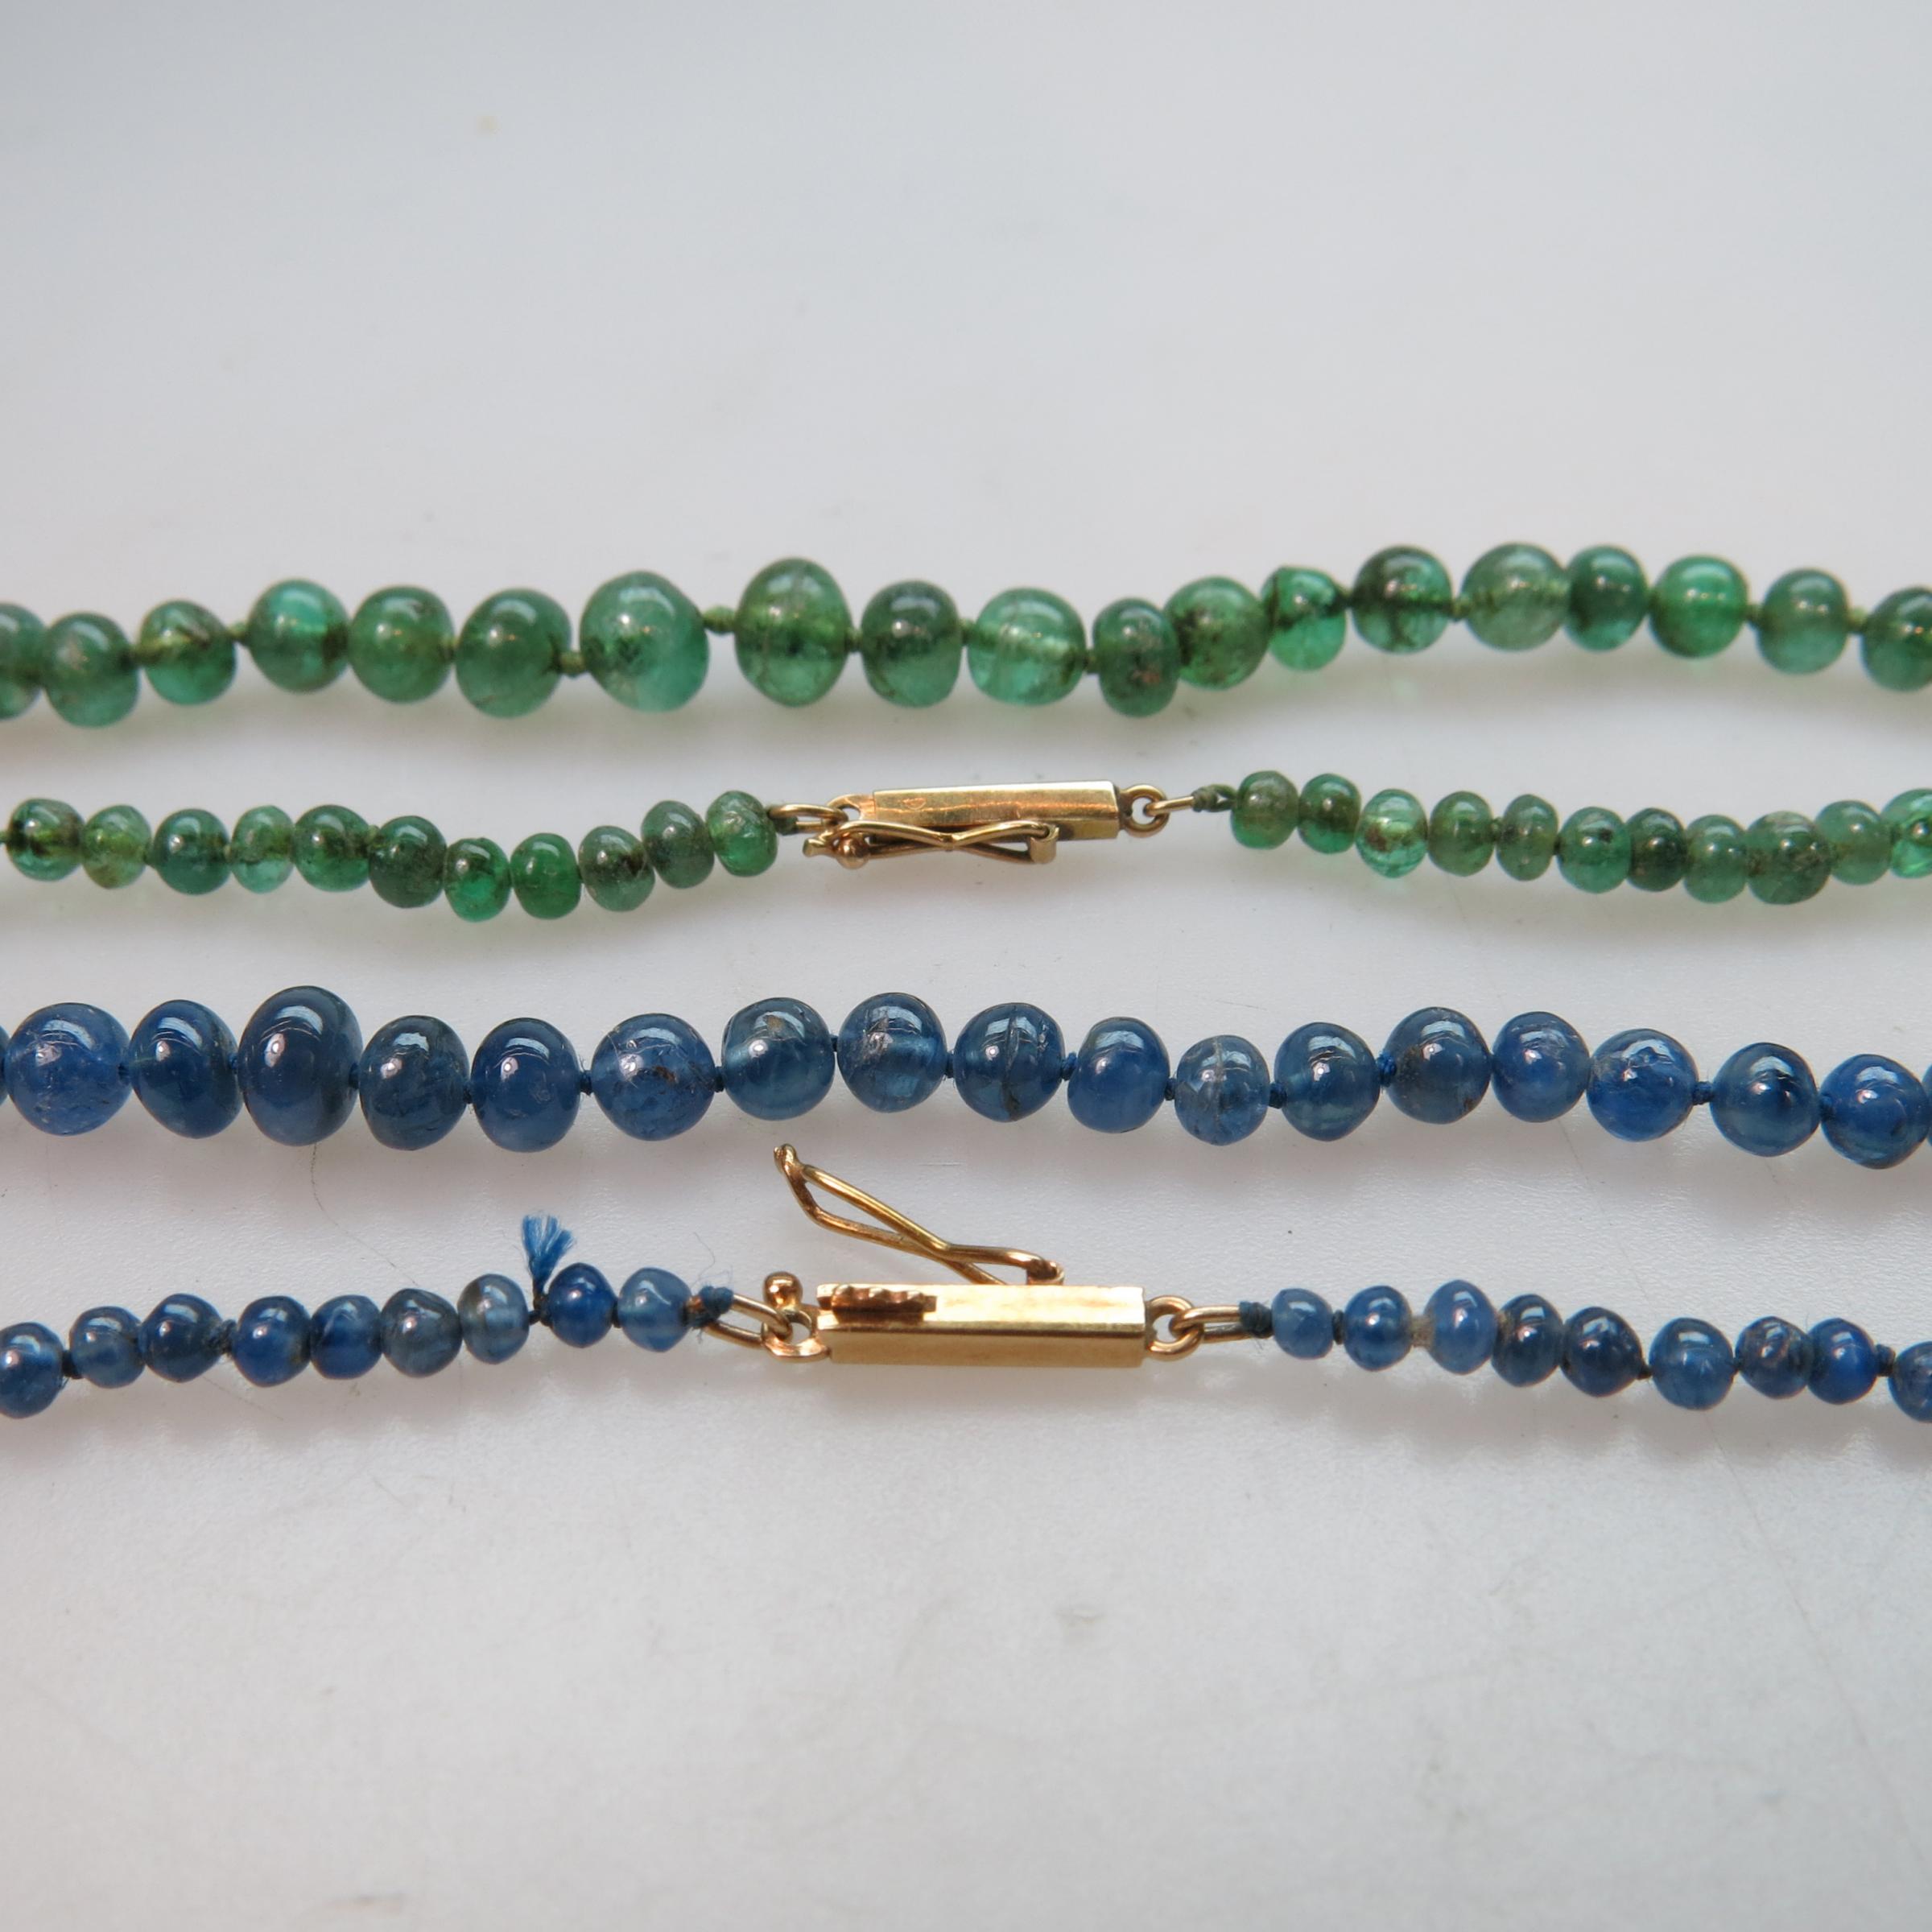 Single Graduated Strand Emerald And Sapphire Bead Necklaces